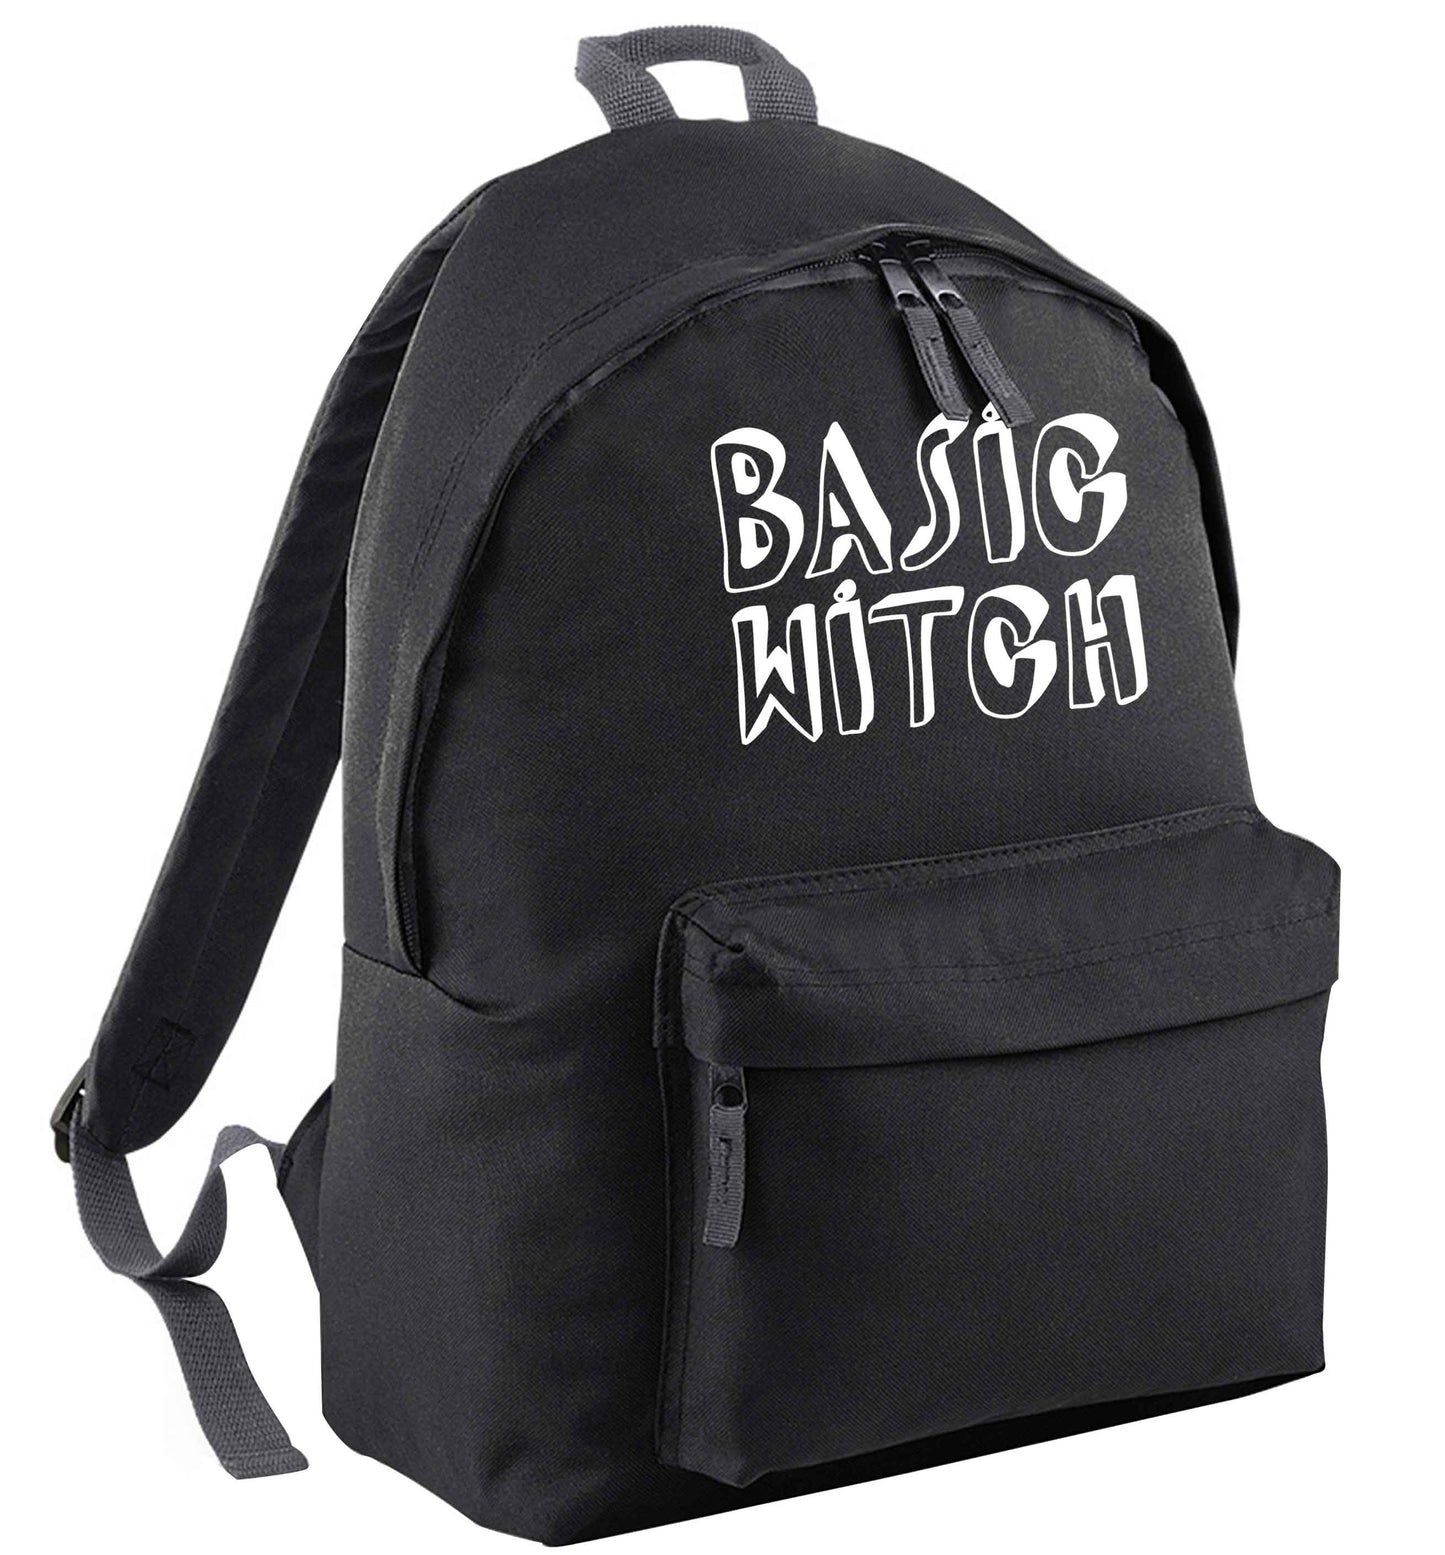 Basic witch black adults backpack